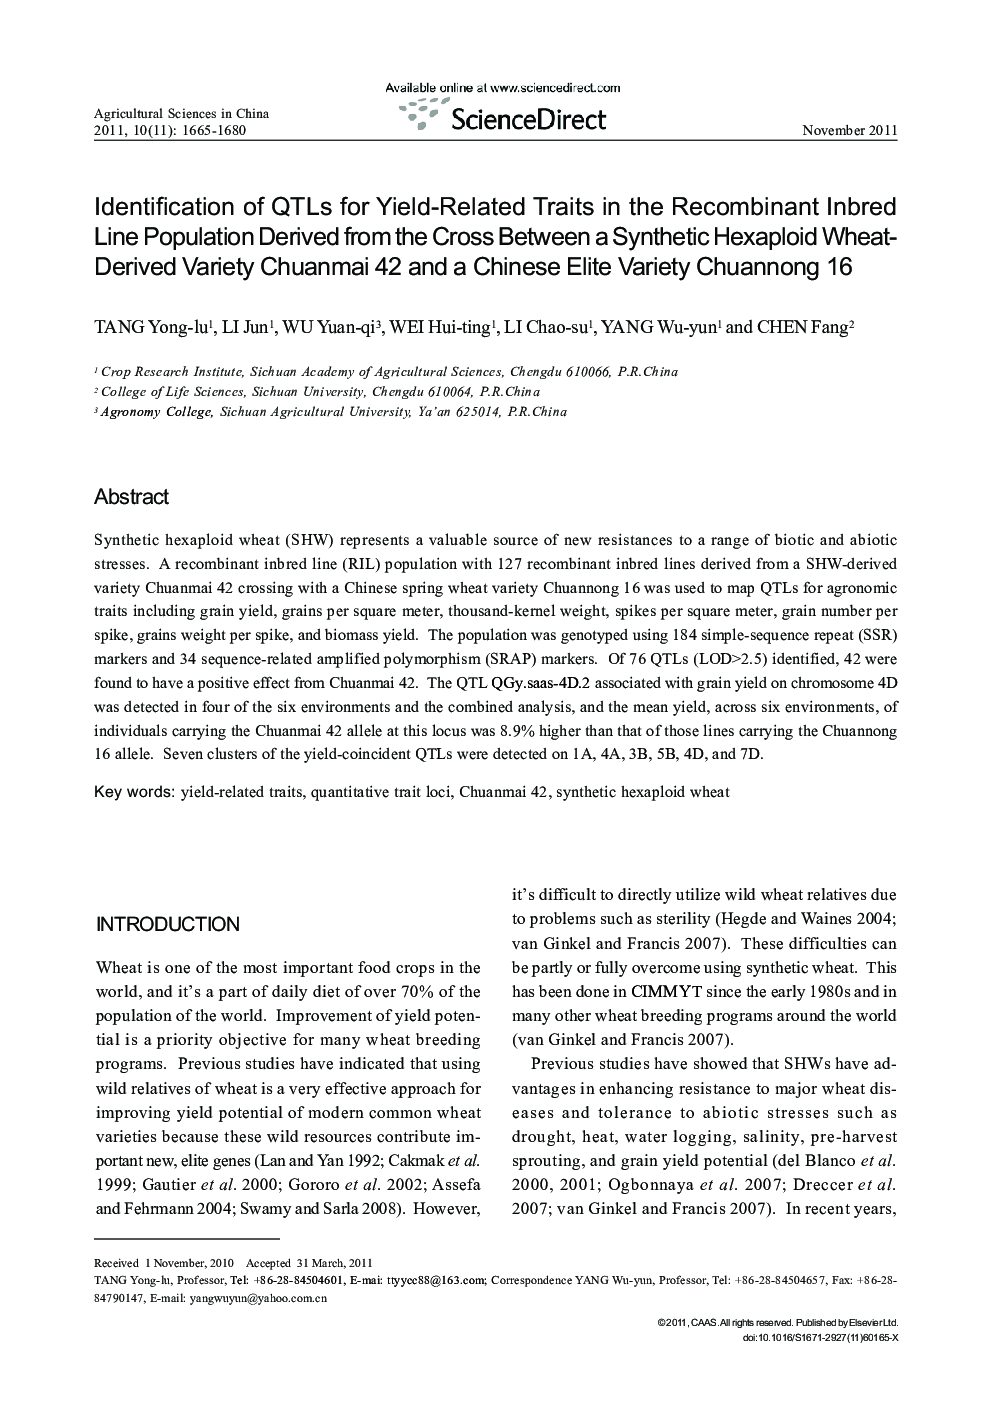 Identification of QTLs for Yield-Related Traits in the ecombinant Inbred Line Population Derived from the Cross Between a Synthetic Hexaploid Wheat-Derived Variety Chuanmai 42 and a Chinese Elite Variety Chuannong 16